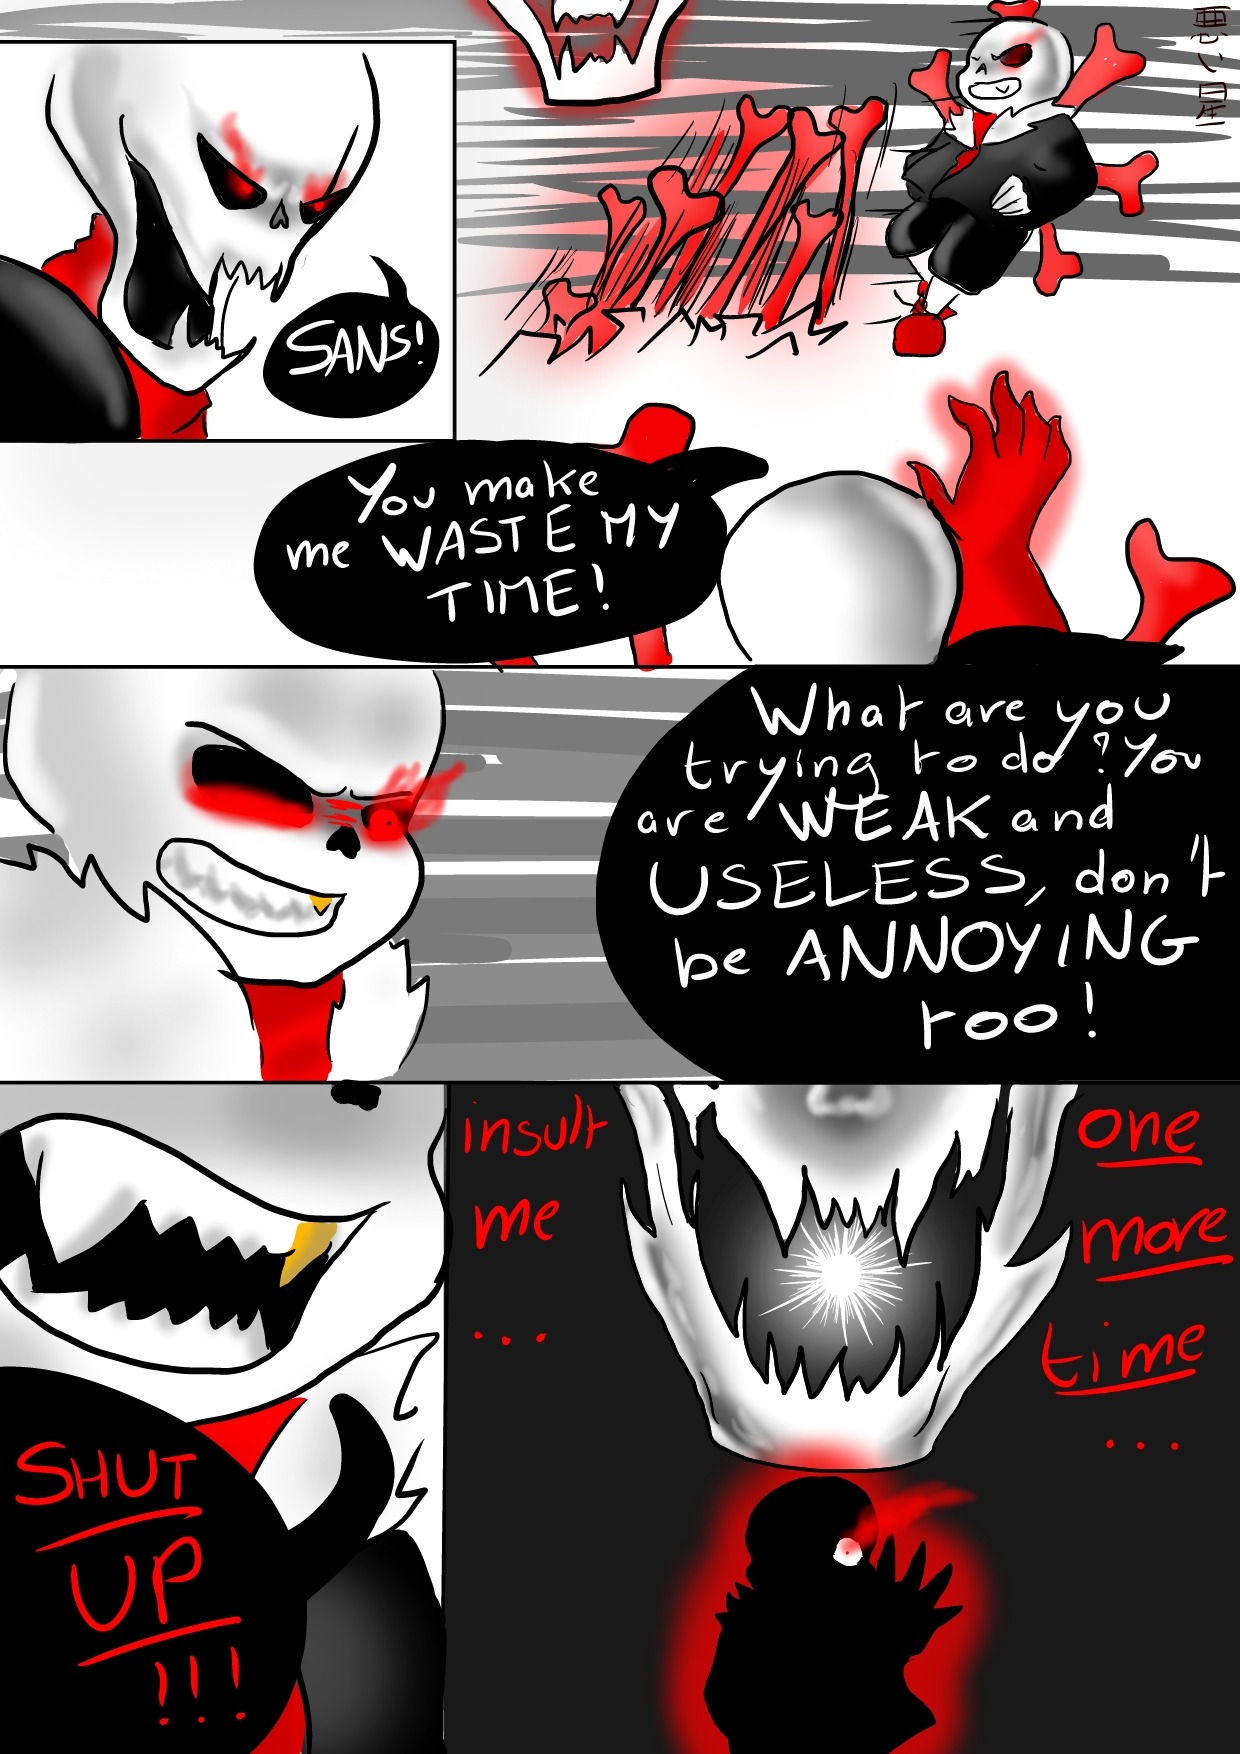 This was the first time i did Fell Bros #underfell #underfell #underfe